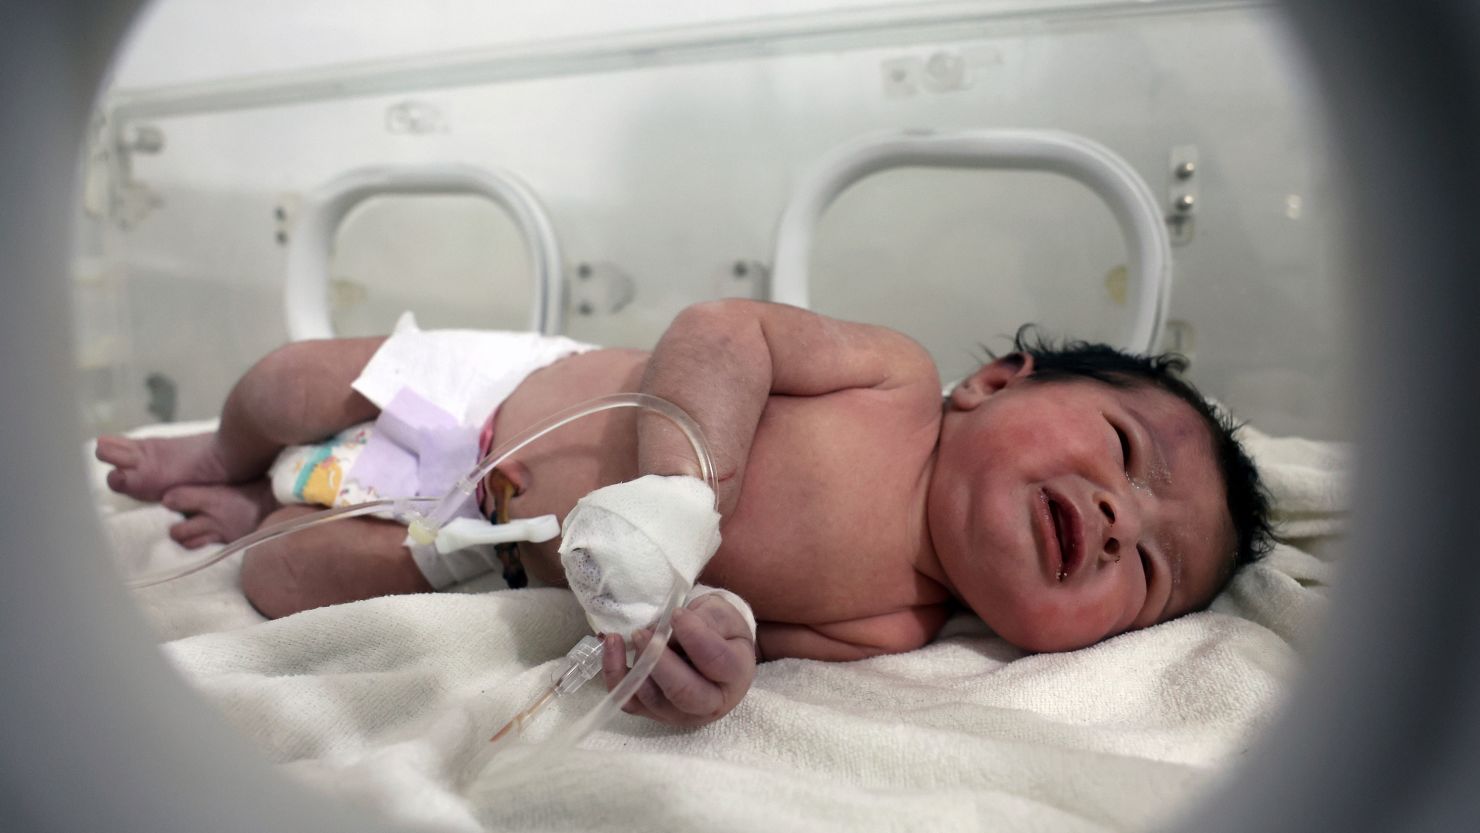 Newborn baby reportedly rescued from earthquake rubble in Syria